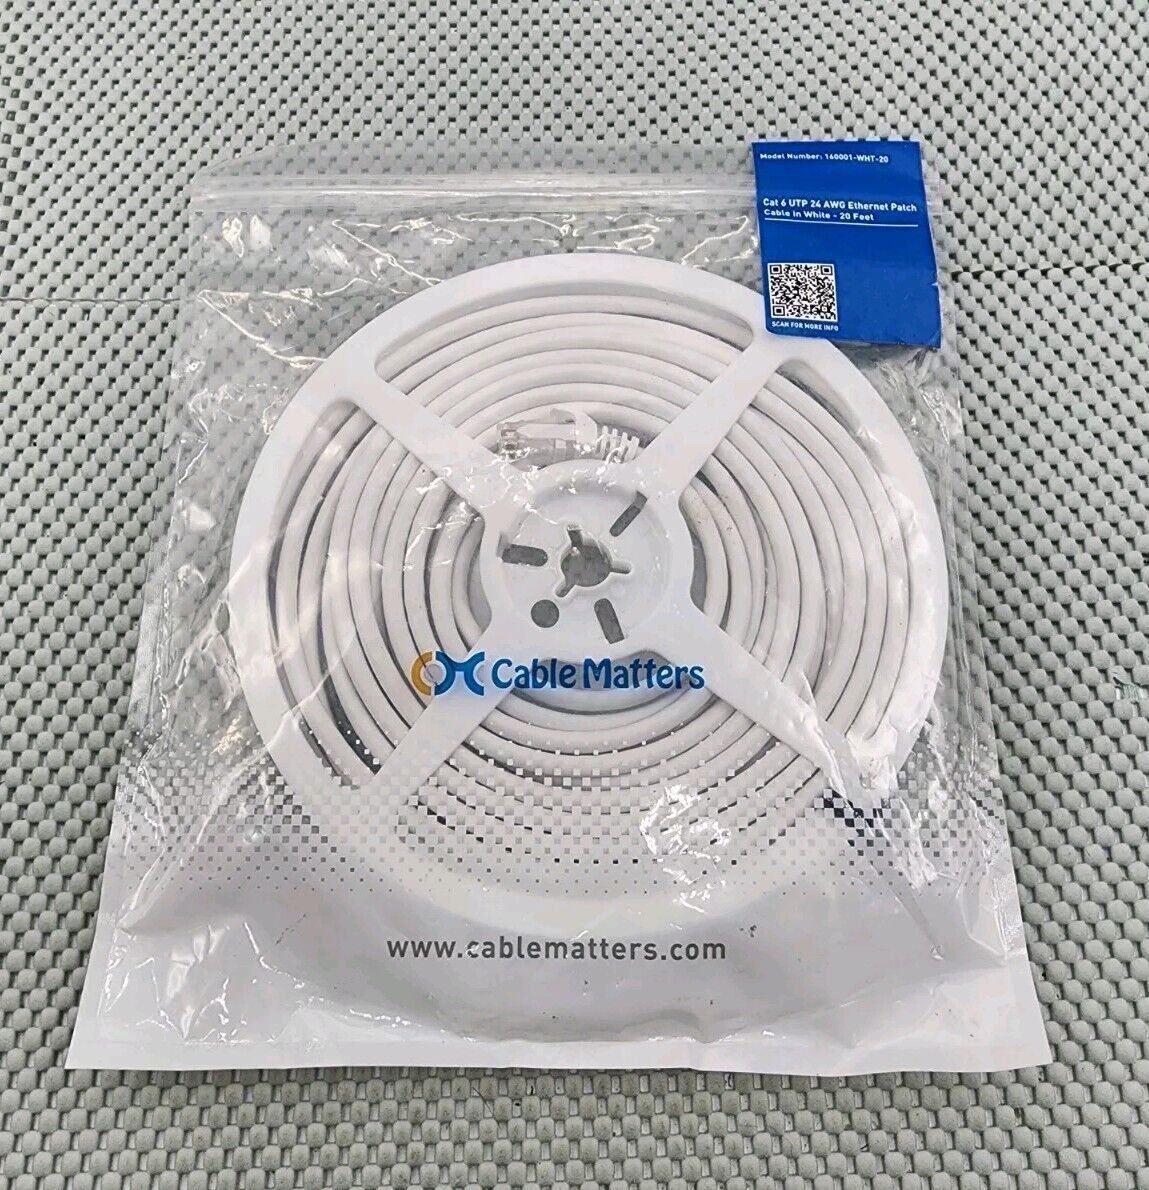 Cable Matters Cat6 UTP 24 AWG Ethernet Patch Cable in White 20ft 160001-WHT-20